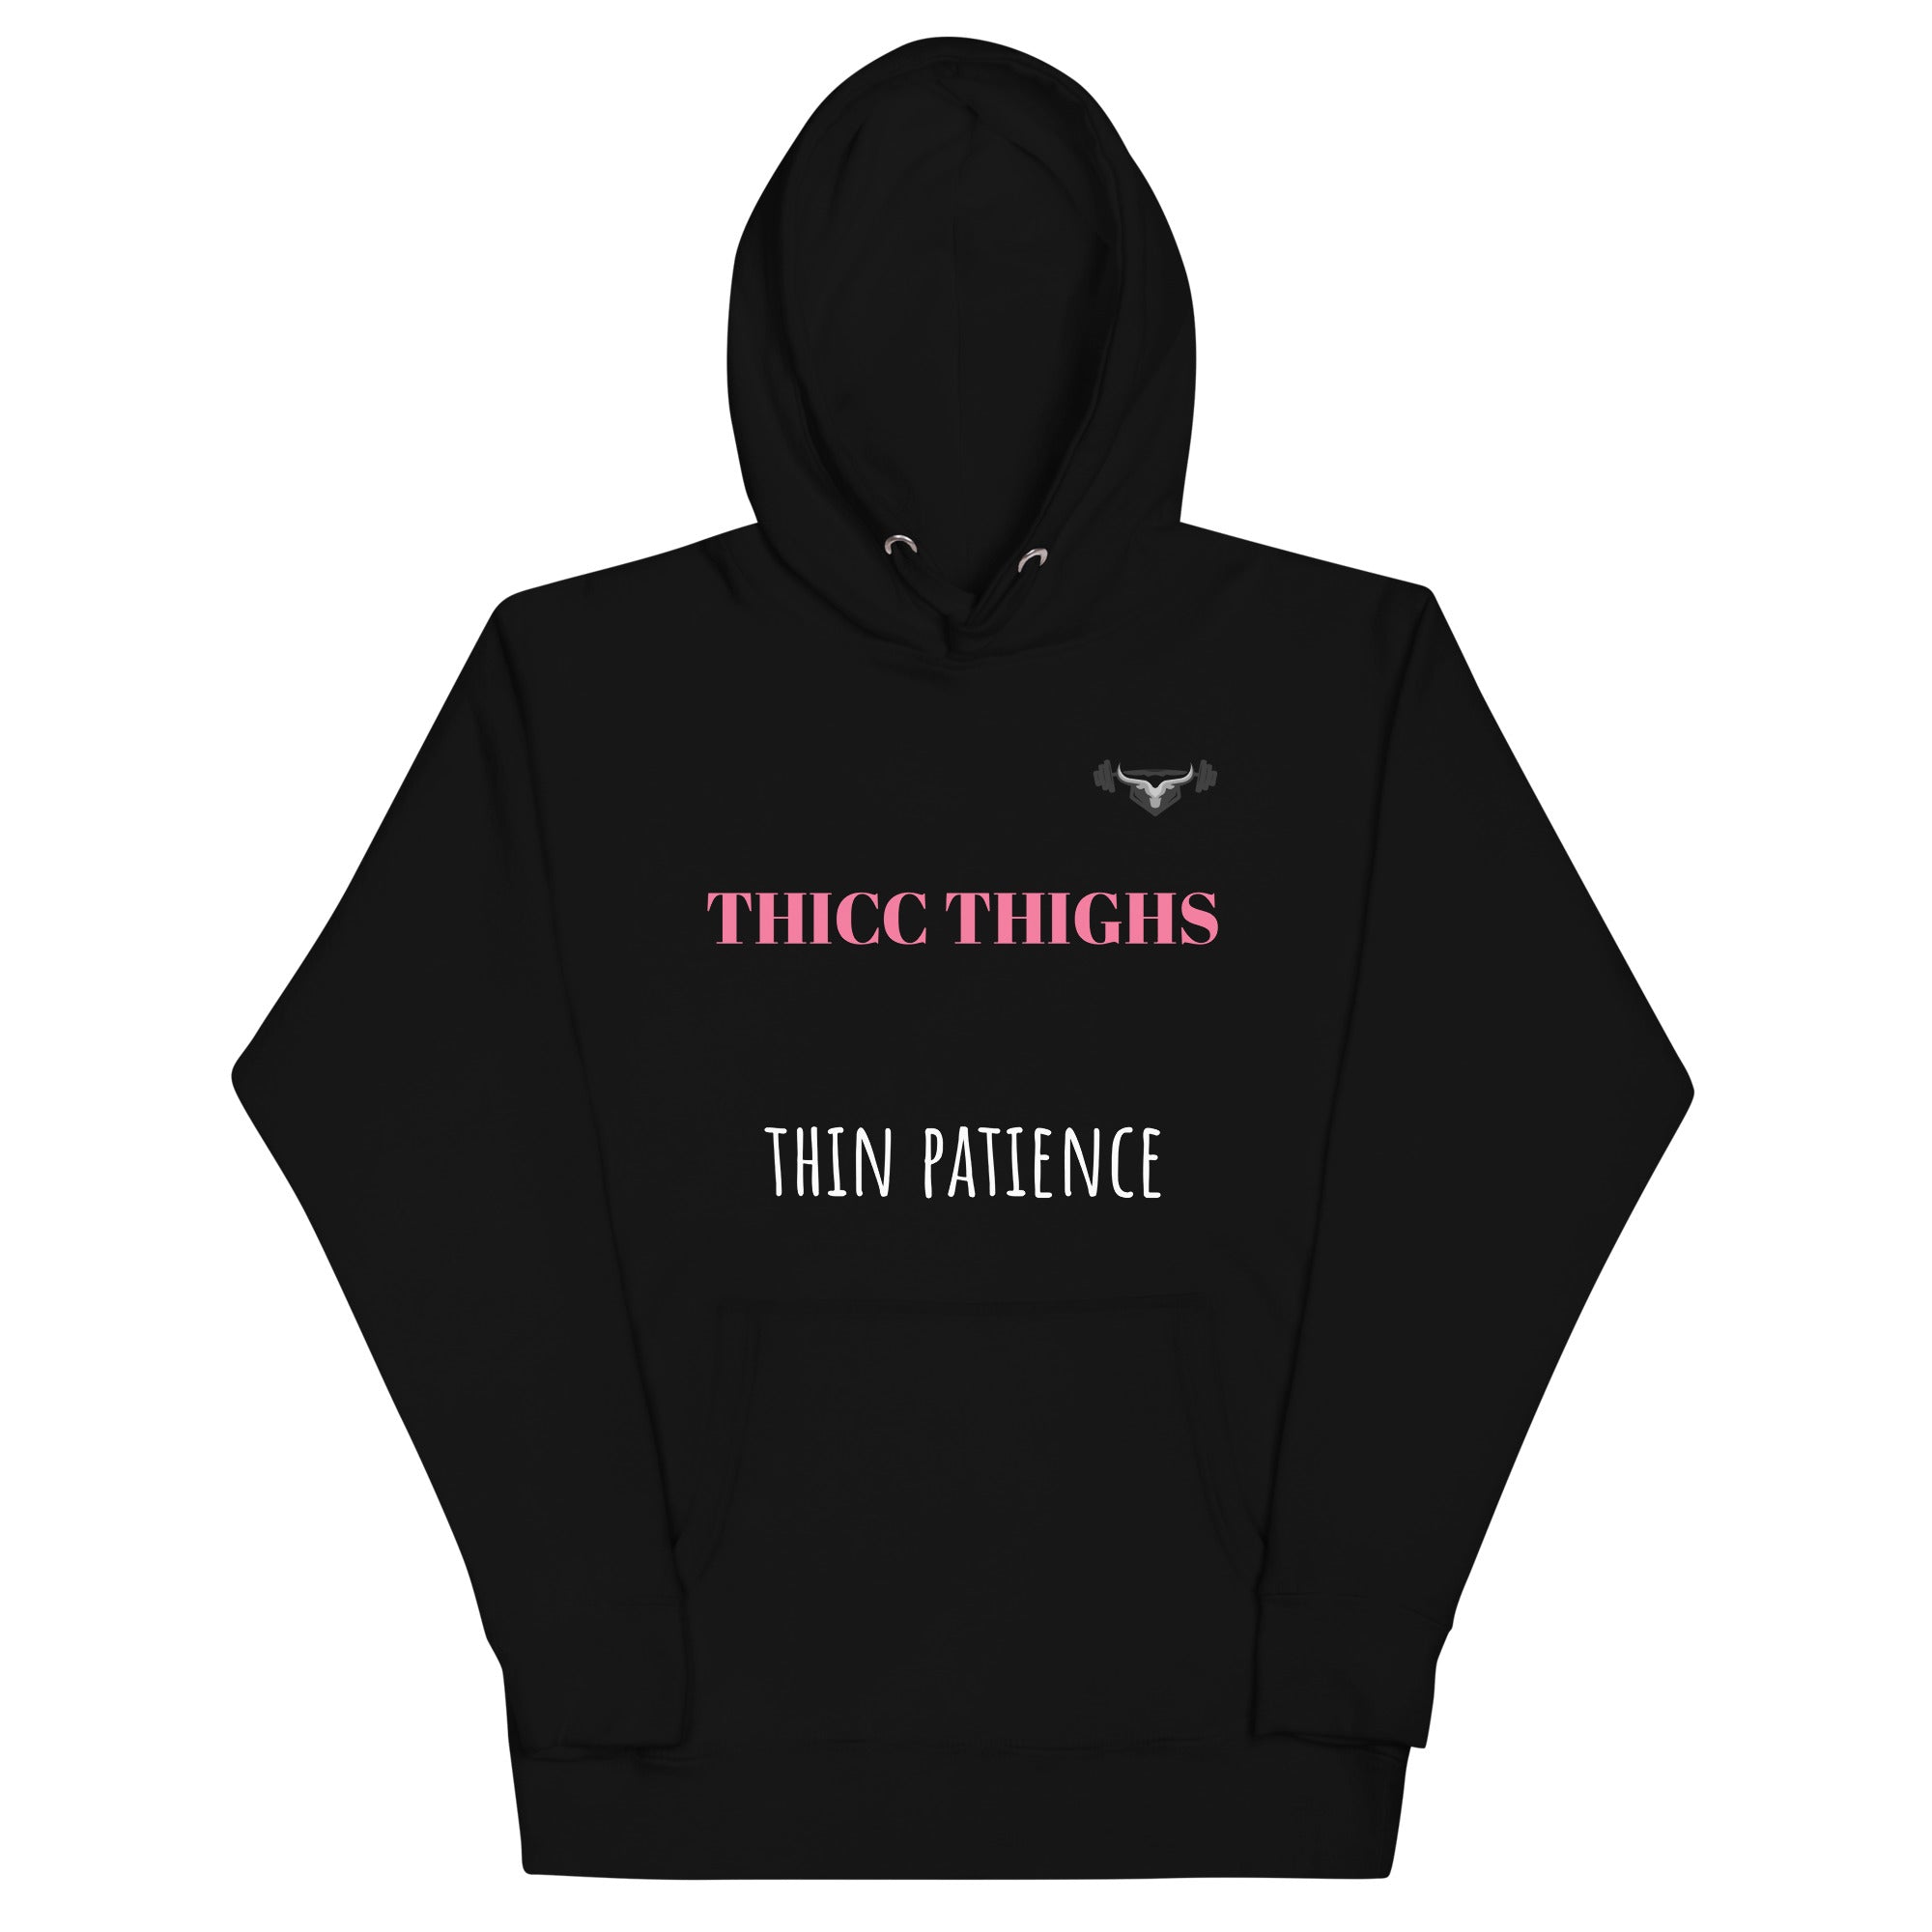 Women's THICC THIGHS thin patience hoodie – No Bull Lifting